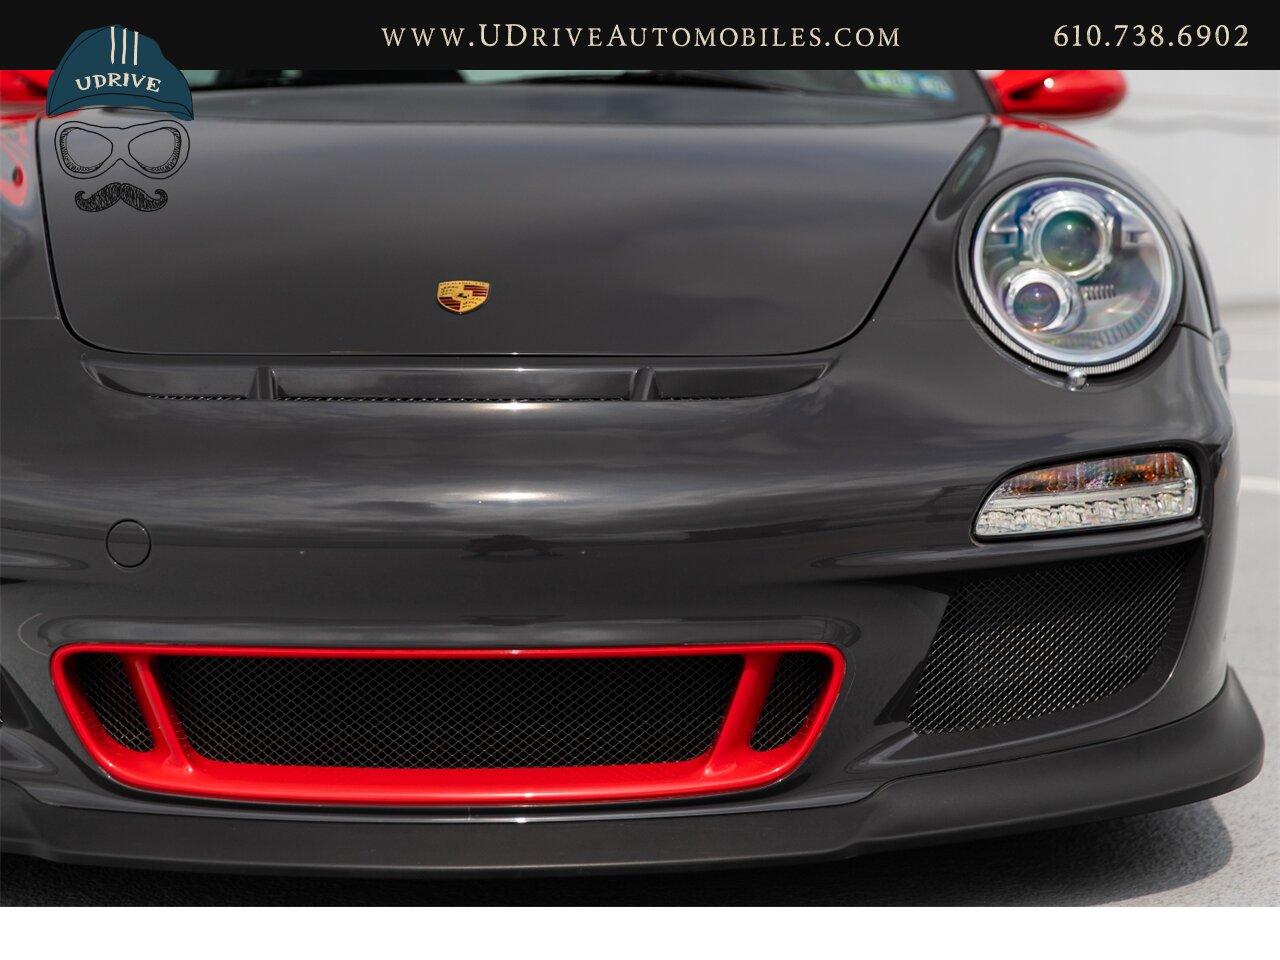 2010 Porsche 911 GT3 RS 1k Miles Dev Red Stitching Throughout  Front Axle Lift Sport Chrono 997.2 - Photo 14 - West Chester, PA 19382